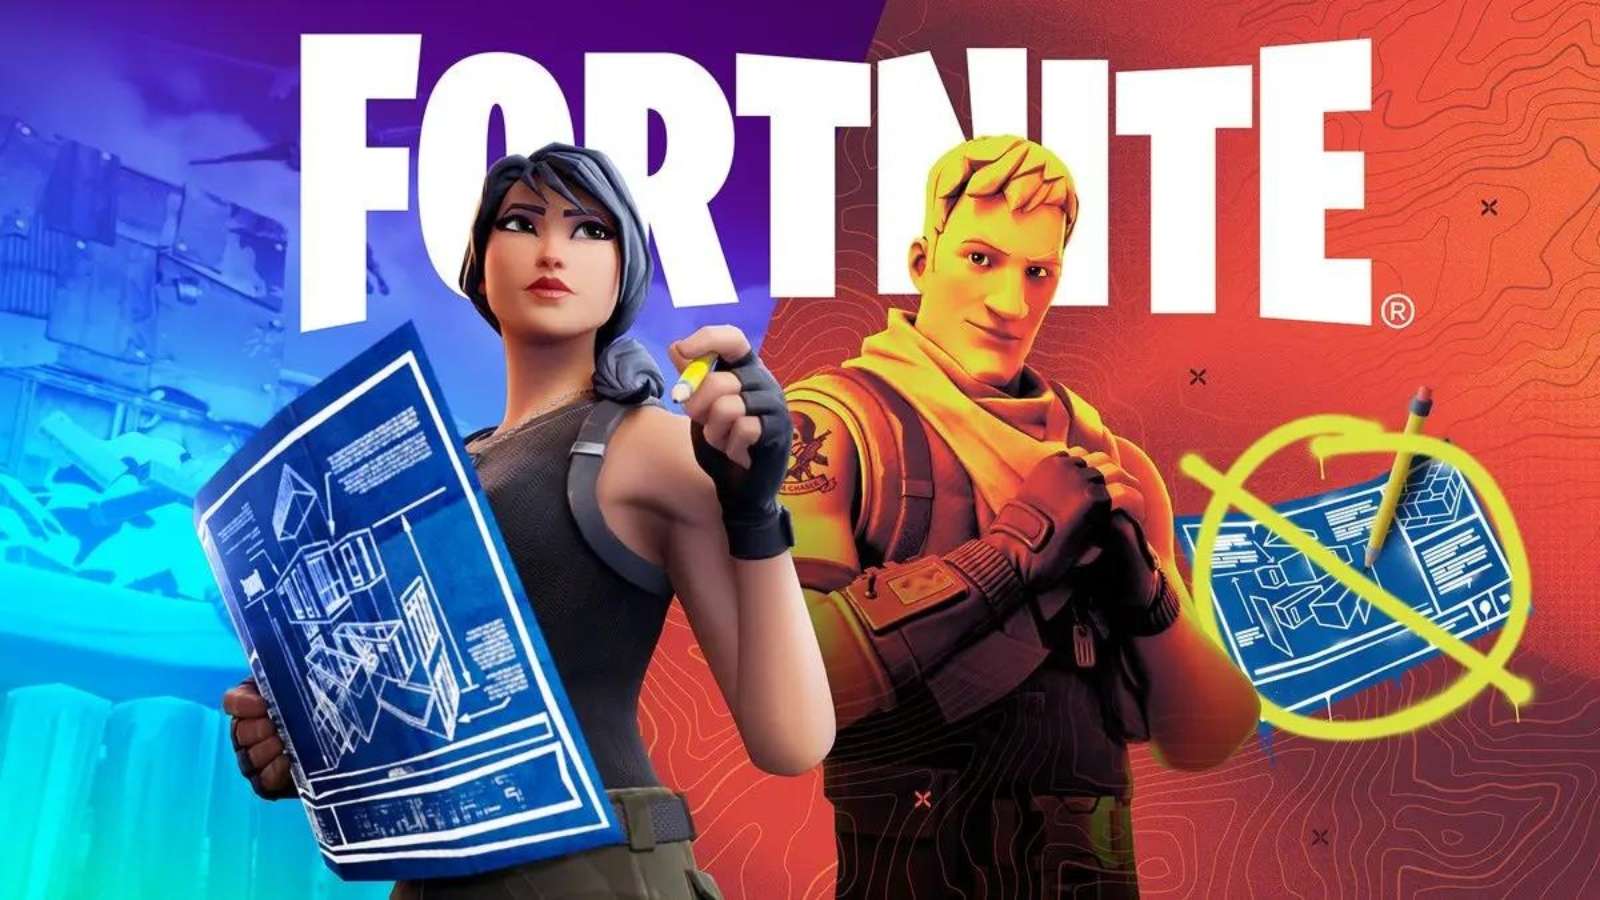 Fortnite Zero Build cover with two characters